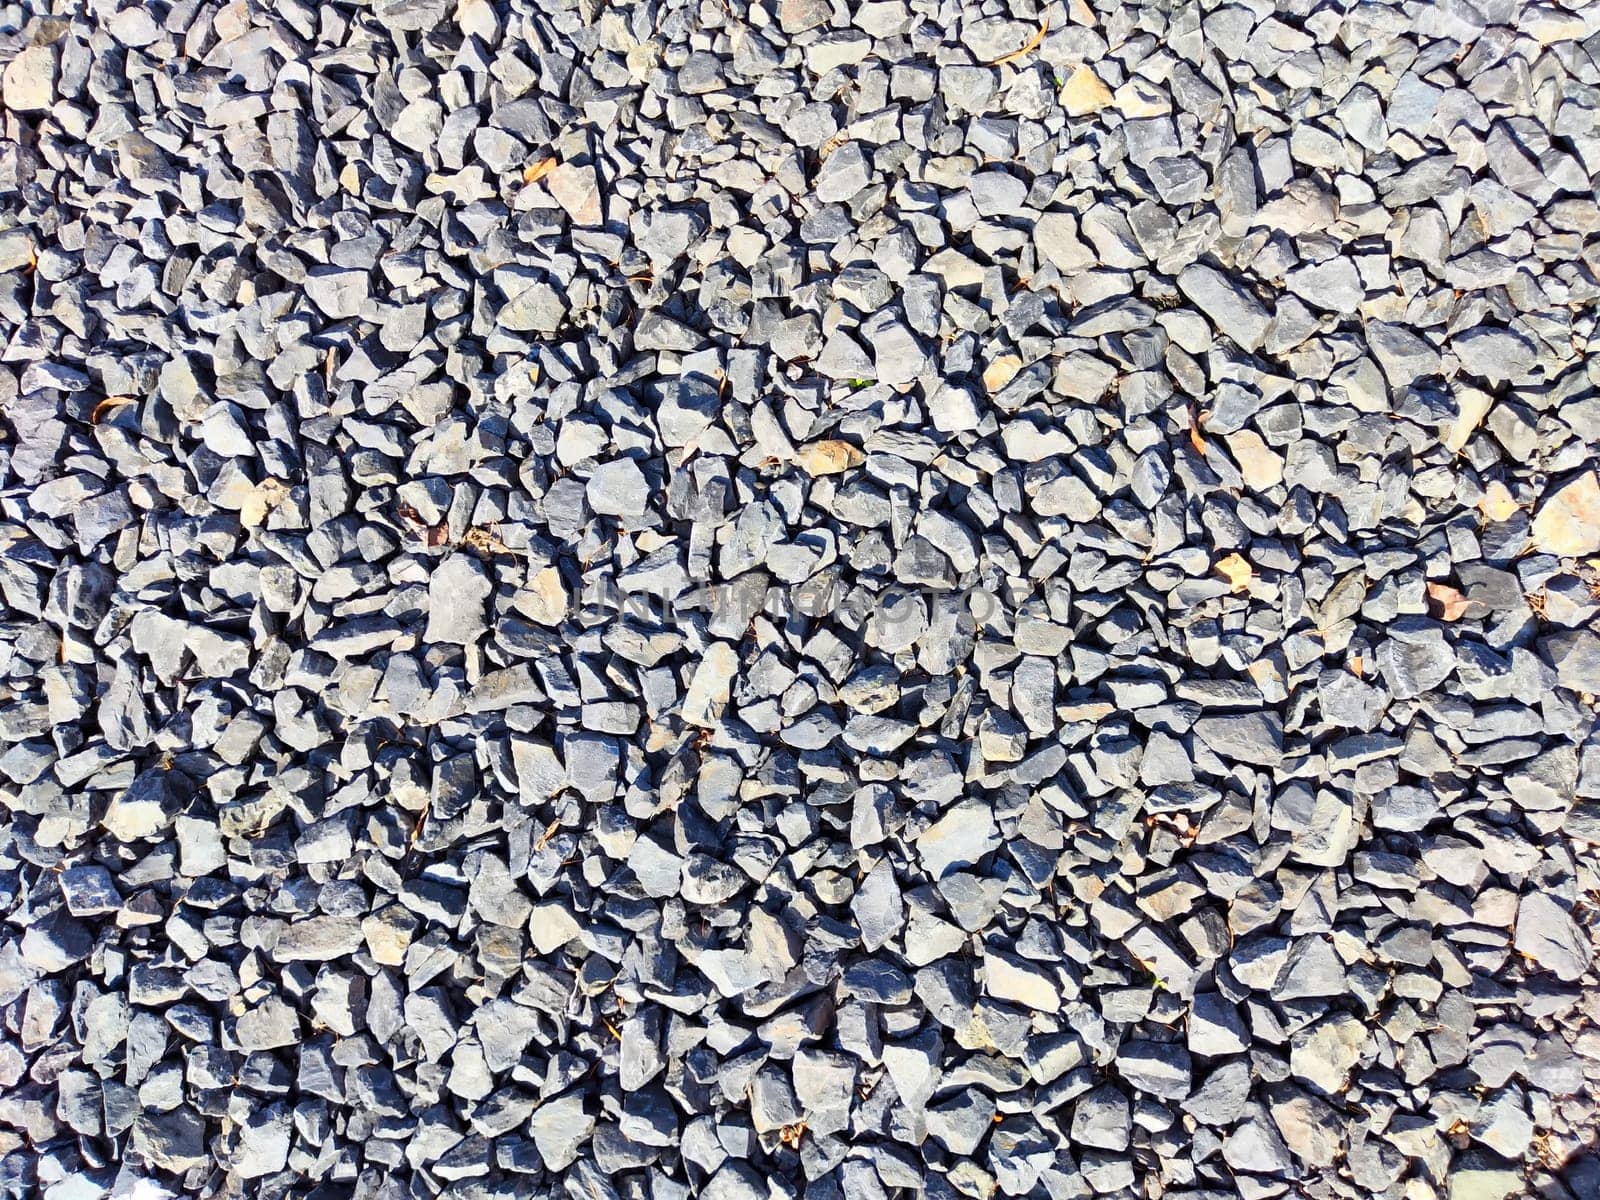 Stone asphalt texture of road in a day. Grey asphalt road and gravel. Background pebble and gravel